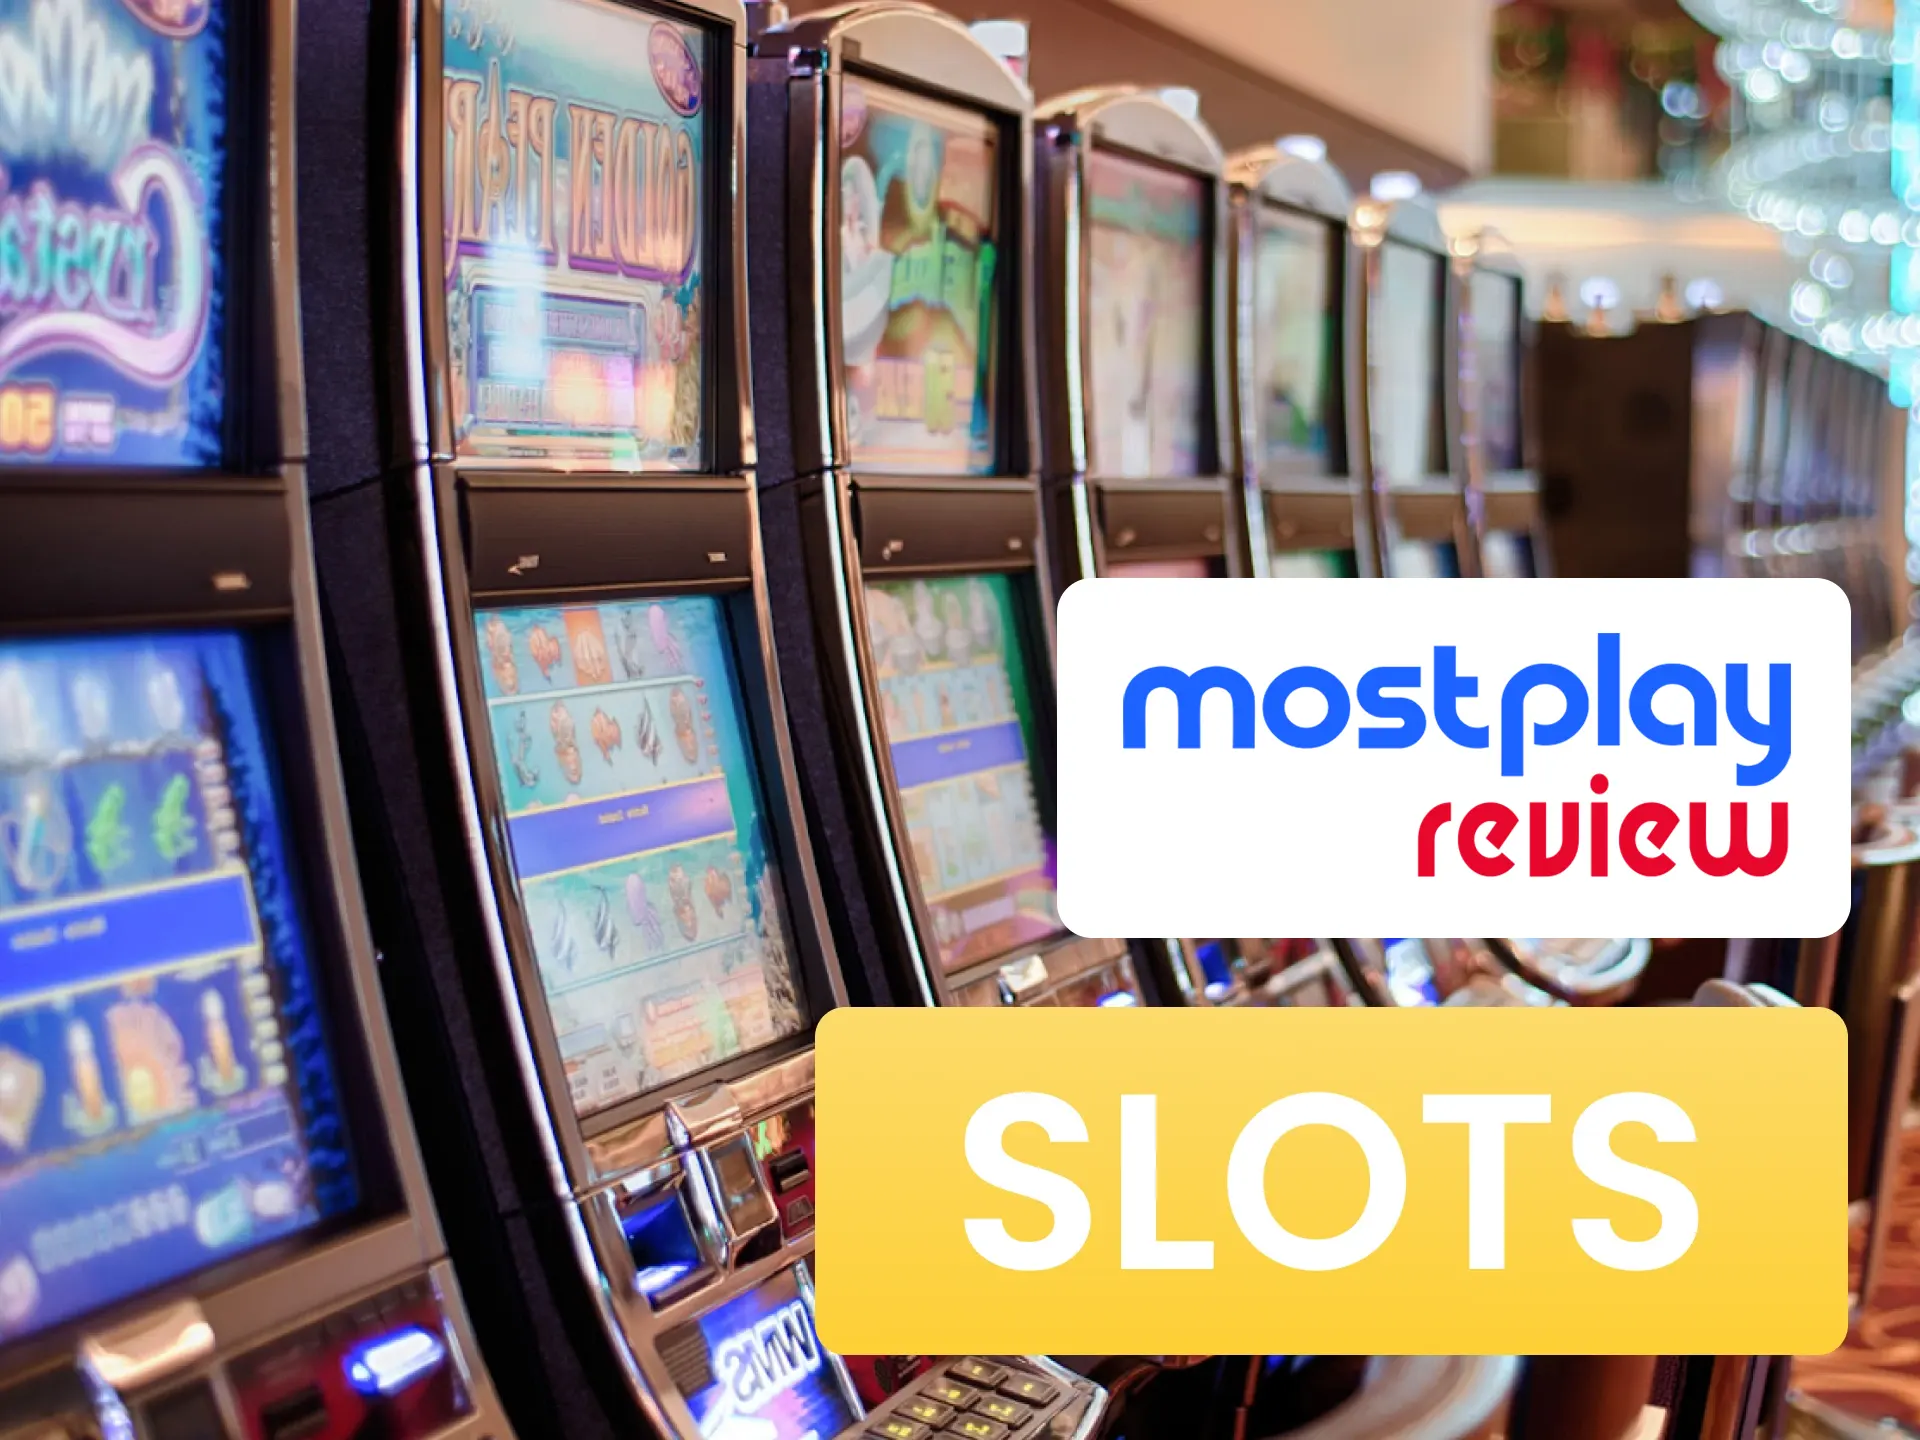 Spin your favourite slots at Mostplay casino.